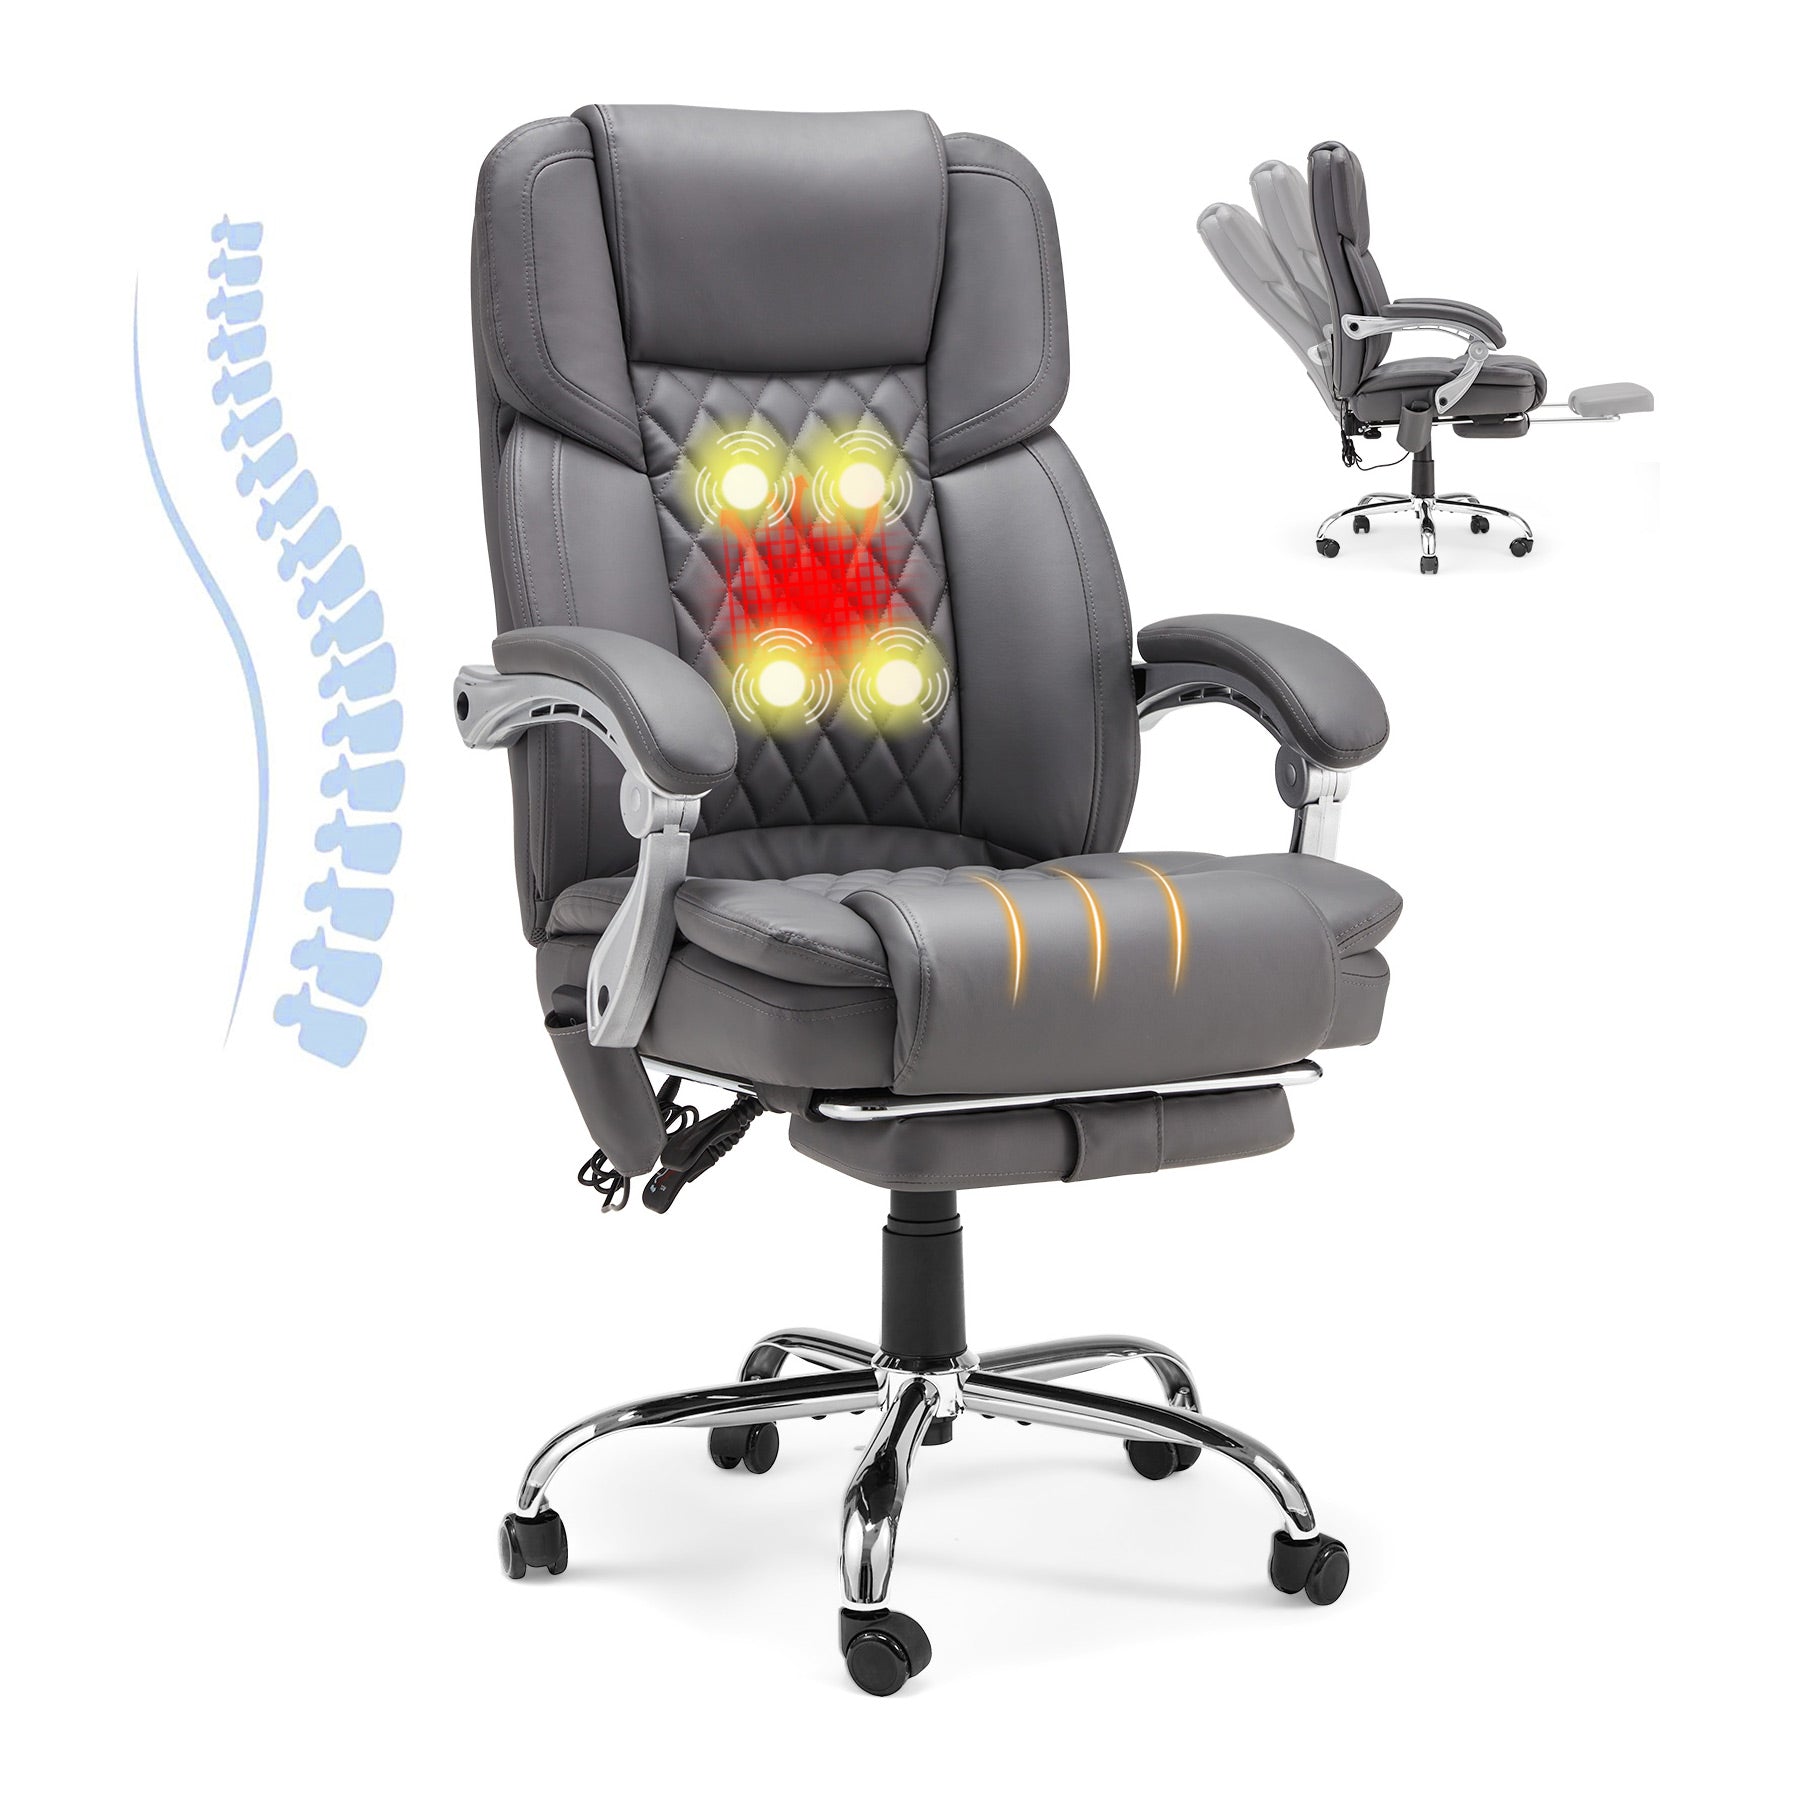 executive-office-chair-ergonomic-desk-chair-big-and-tall-massage-and-heated-gray